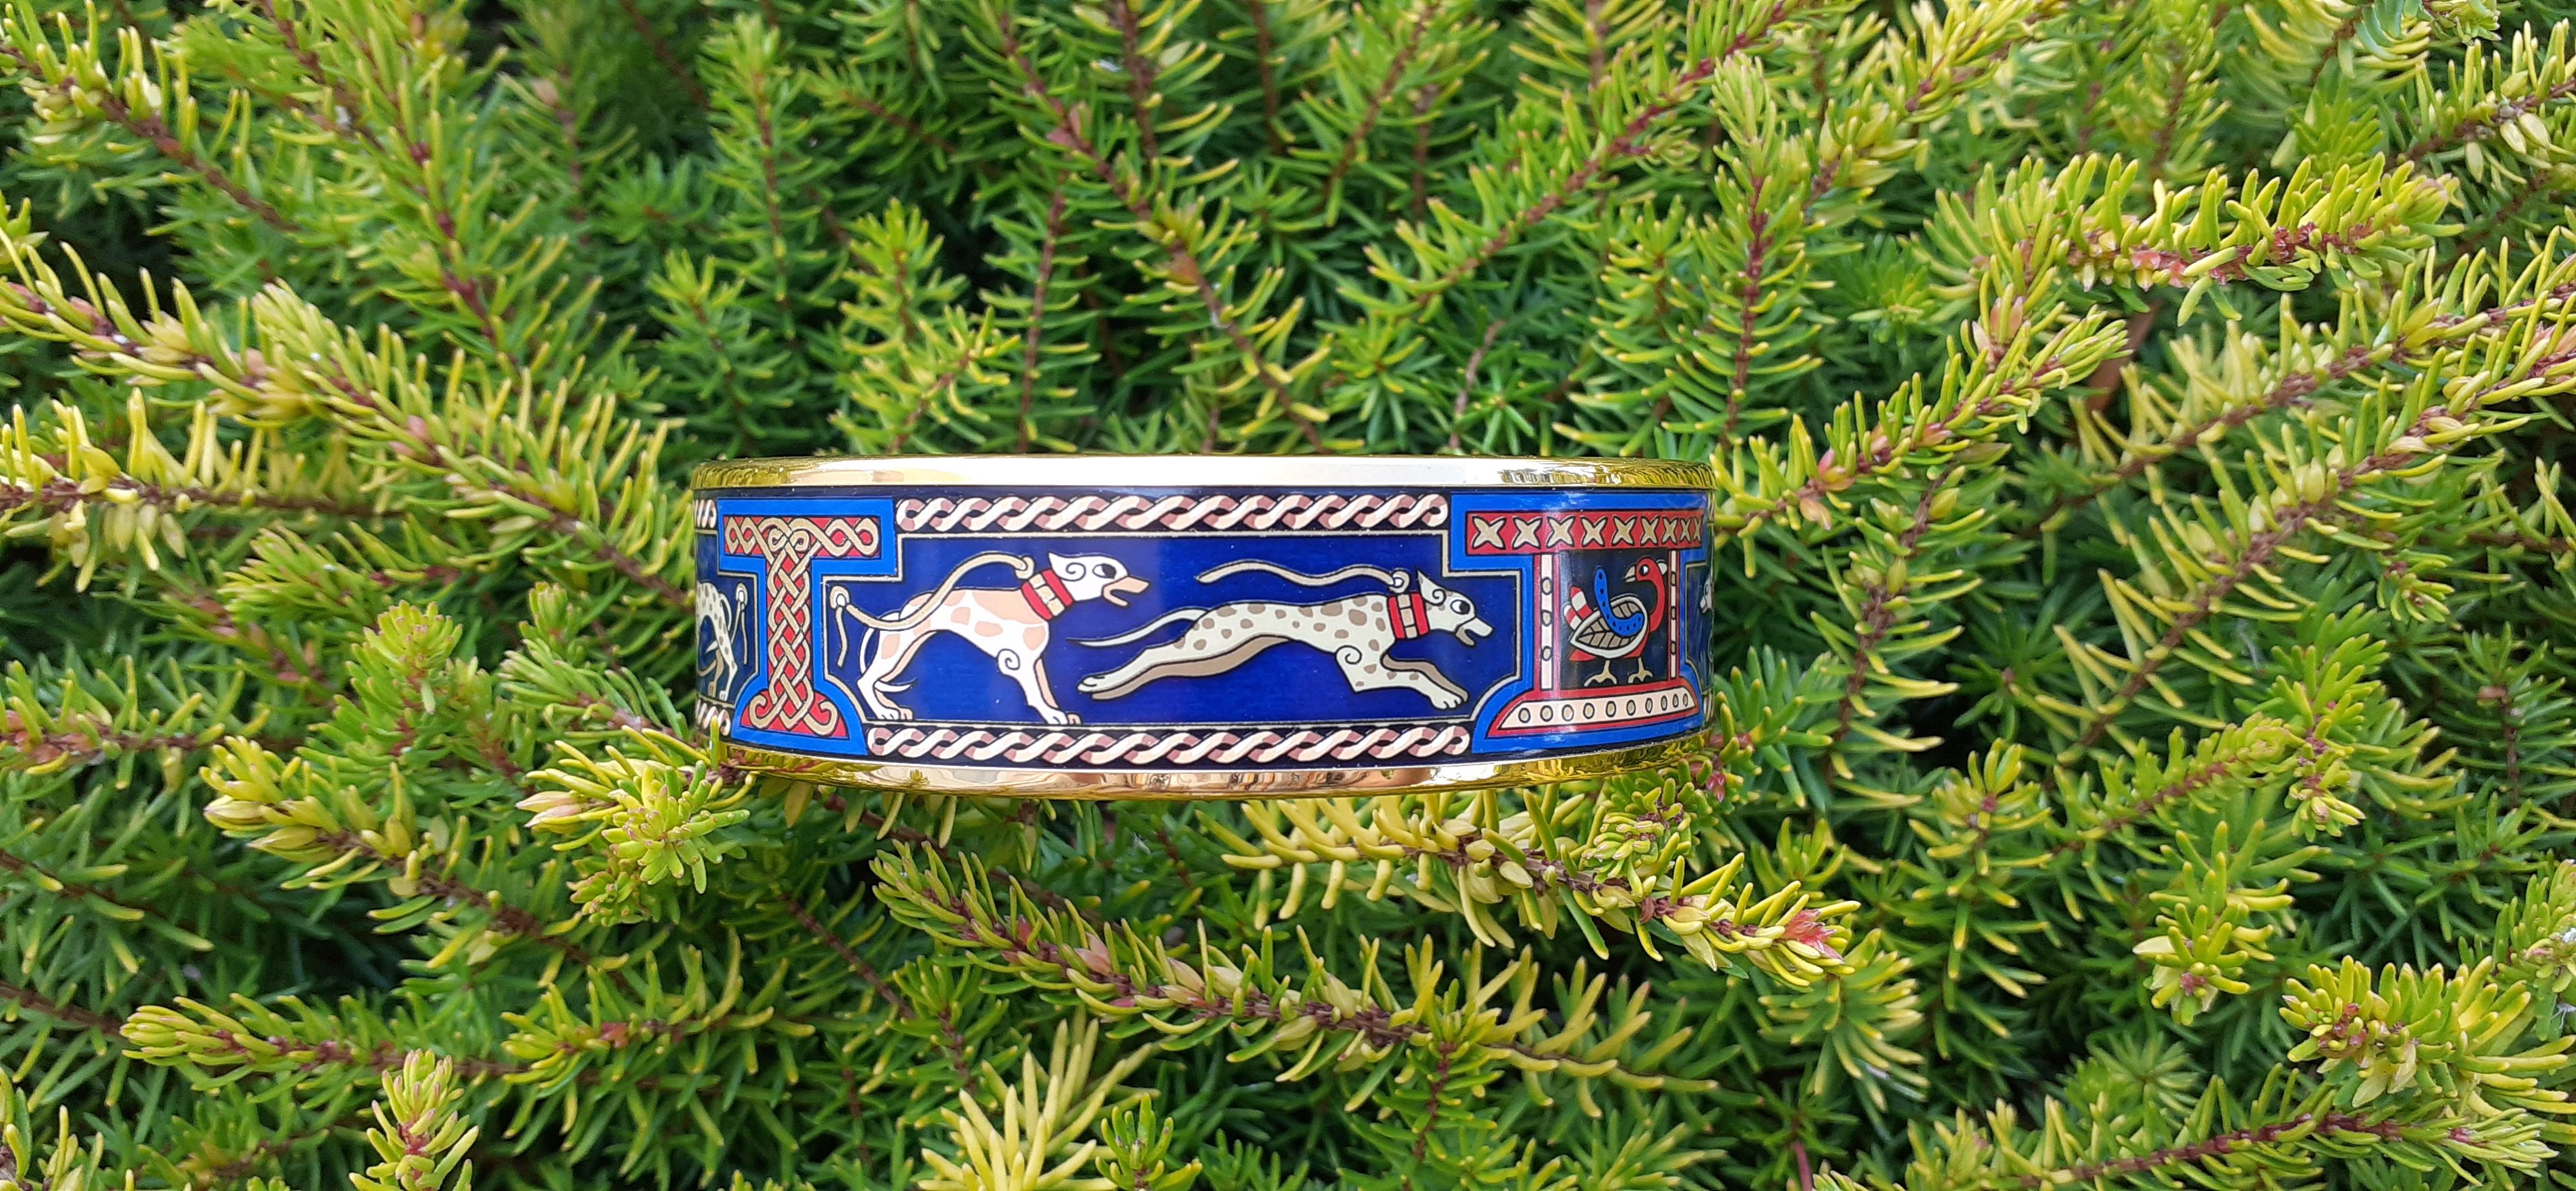 Gorgeous Authentic Hermès Bracelet

Print: Lévriers (Greyhound Dogs)

Made in Austria + Z (1996)

Made of printed enamel and yellow gold plated hardware

Colorways: Navy blue / Beige / Light green / Red

Leashes, collars, and decoration details